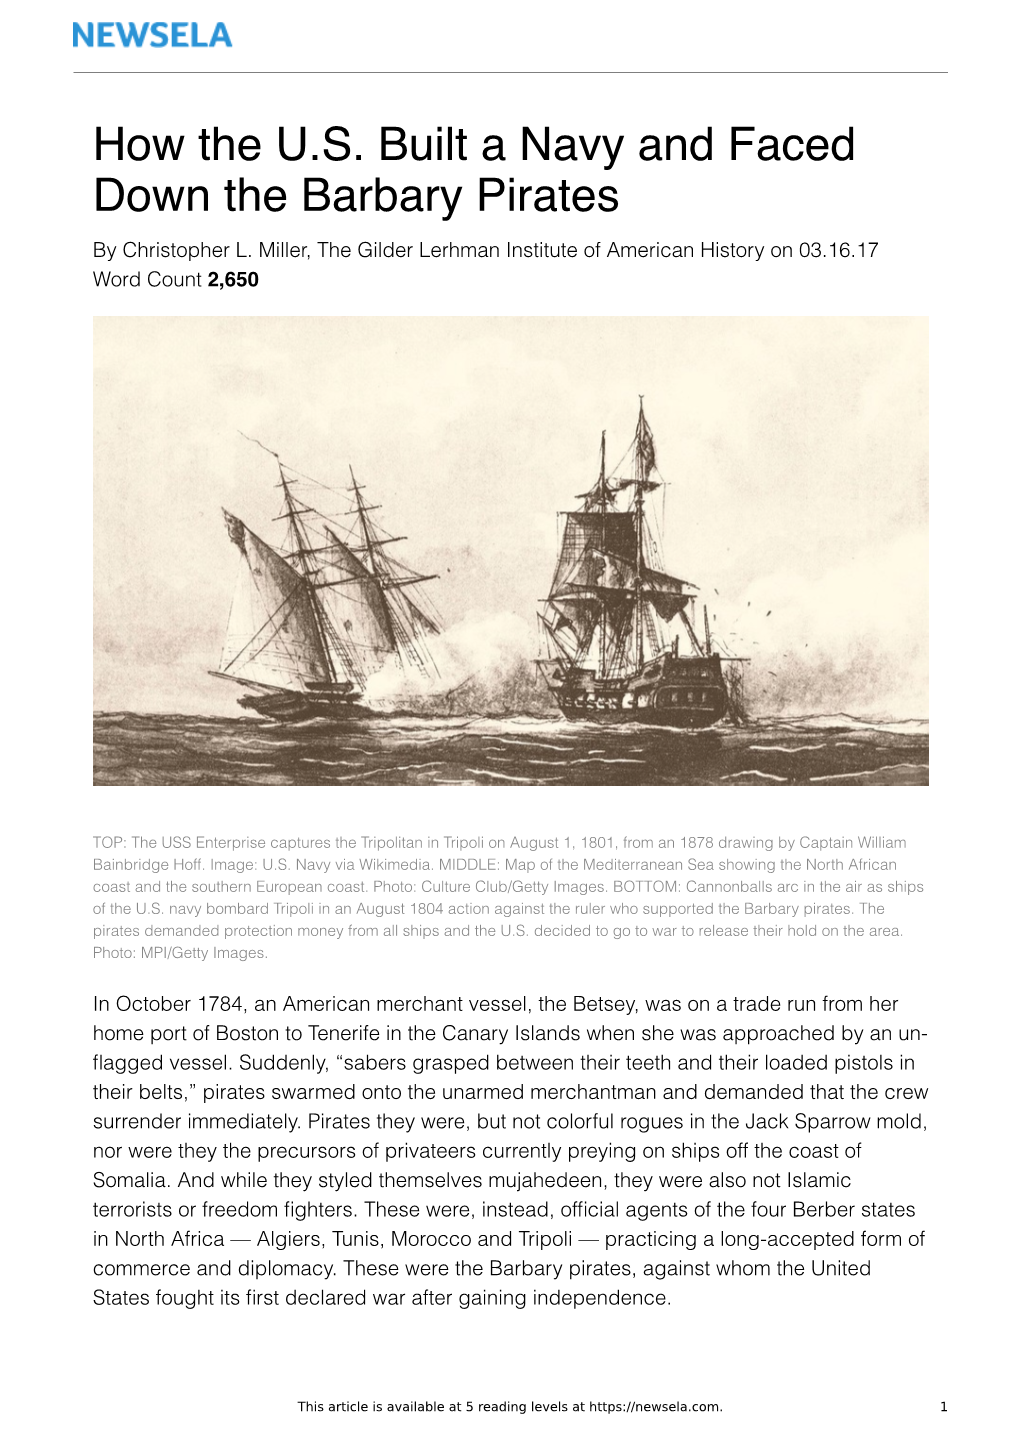 How the U.S. Built a Navy and Faced Down the Barbary Pirates by Christopher L